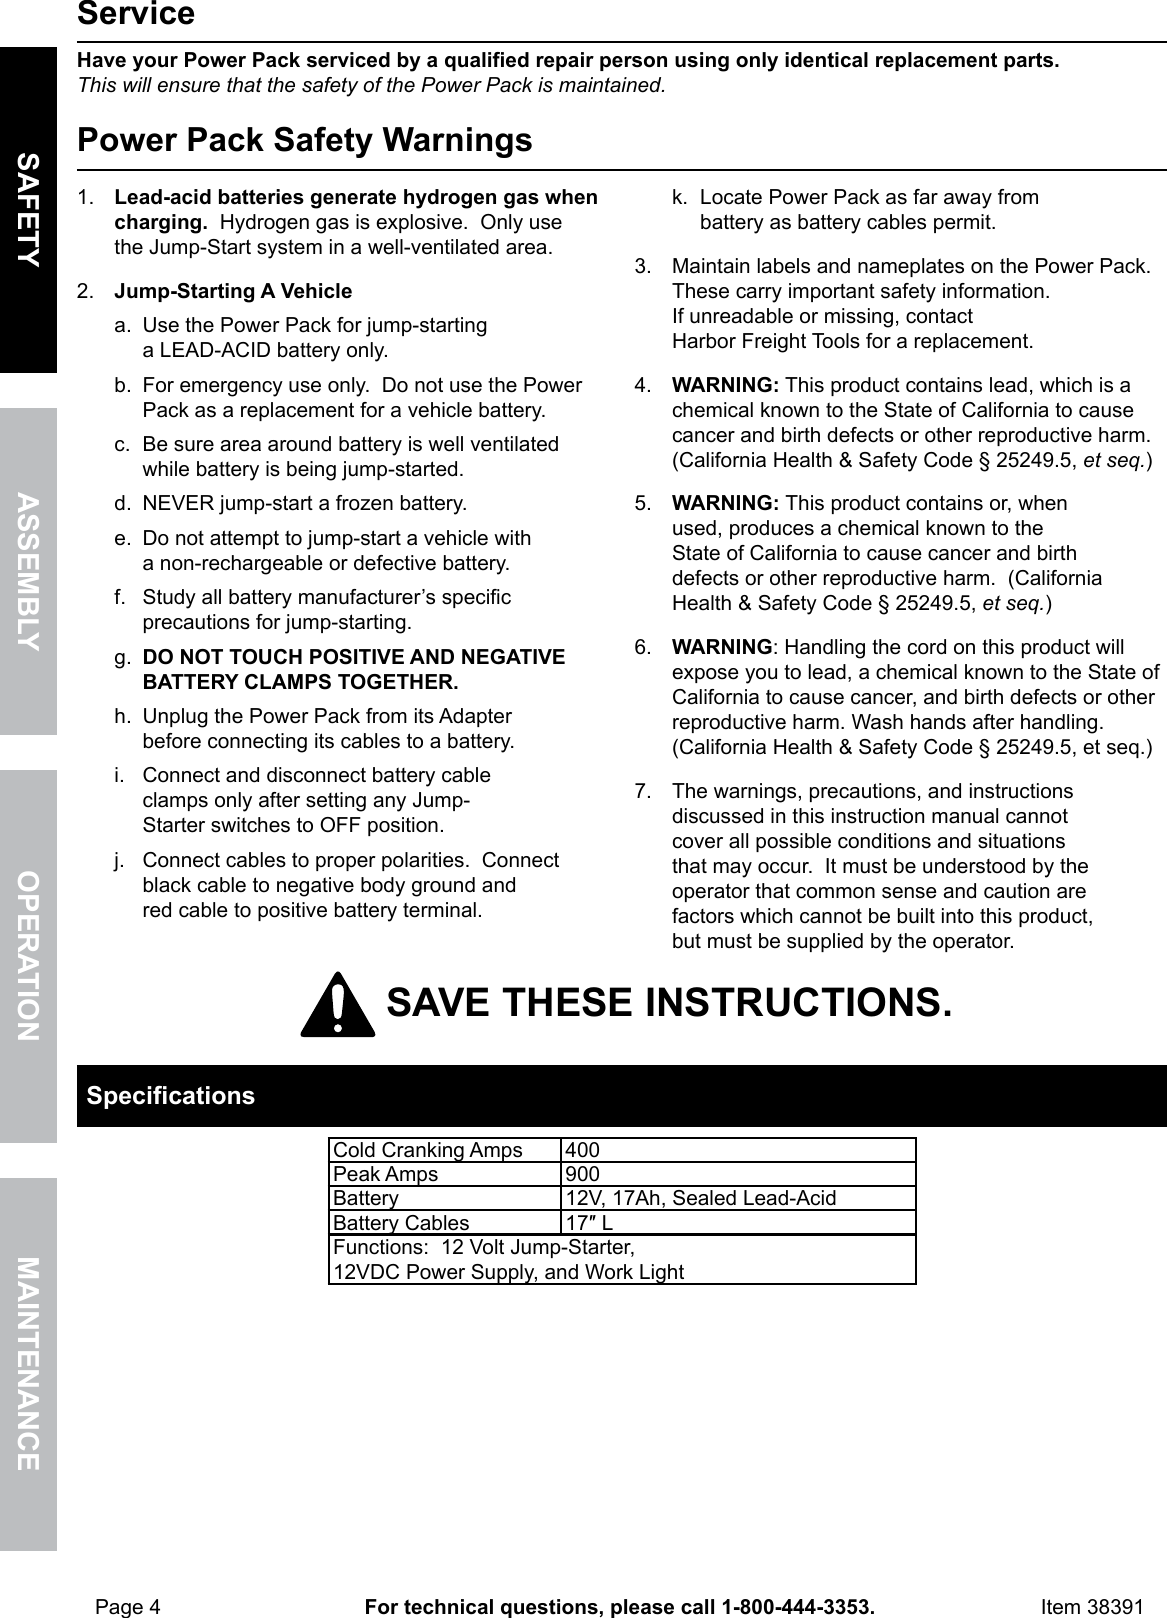 Page 4 of 12 - Harbor-Freight Harbor-Freight-3-In-1-Jump-Starter-And-Power-Supply-Product-Manual-  Harbor-freight-3-in-1-jump-starter-and-power-supply-product-manual